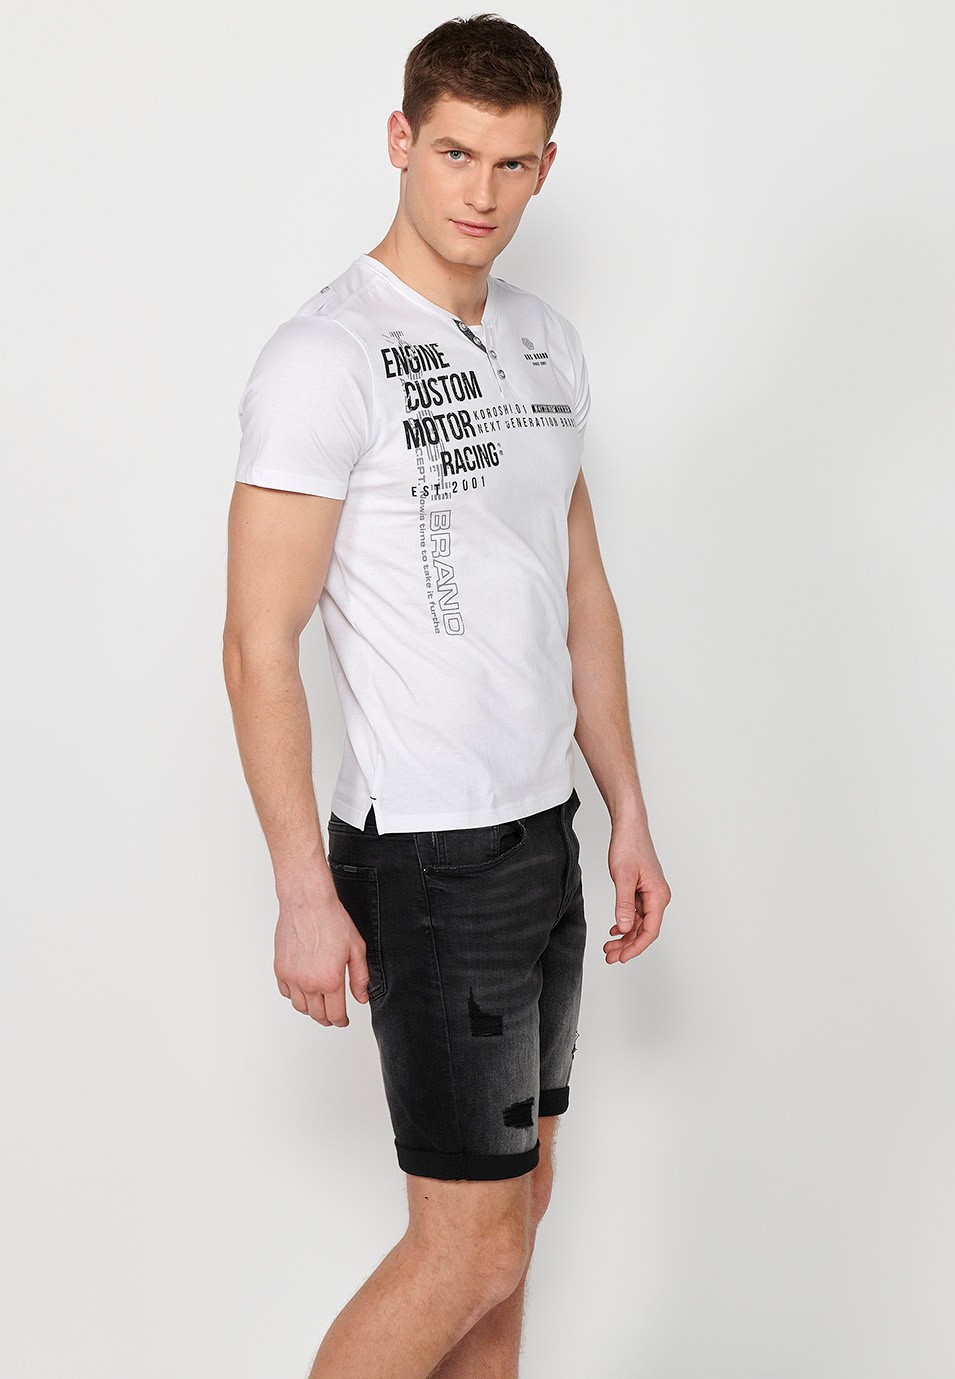 Men's white cotton short-sleeved T-shirt, round neck with buttoned opening